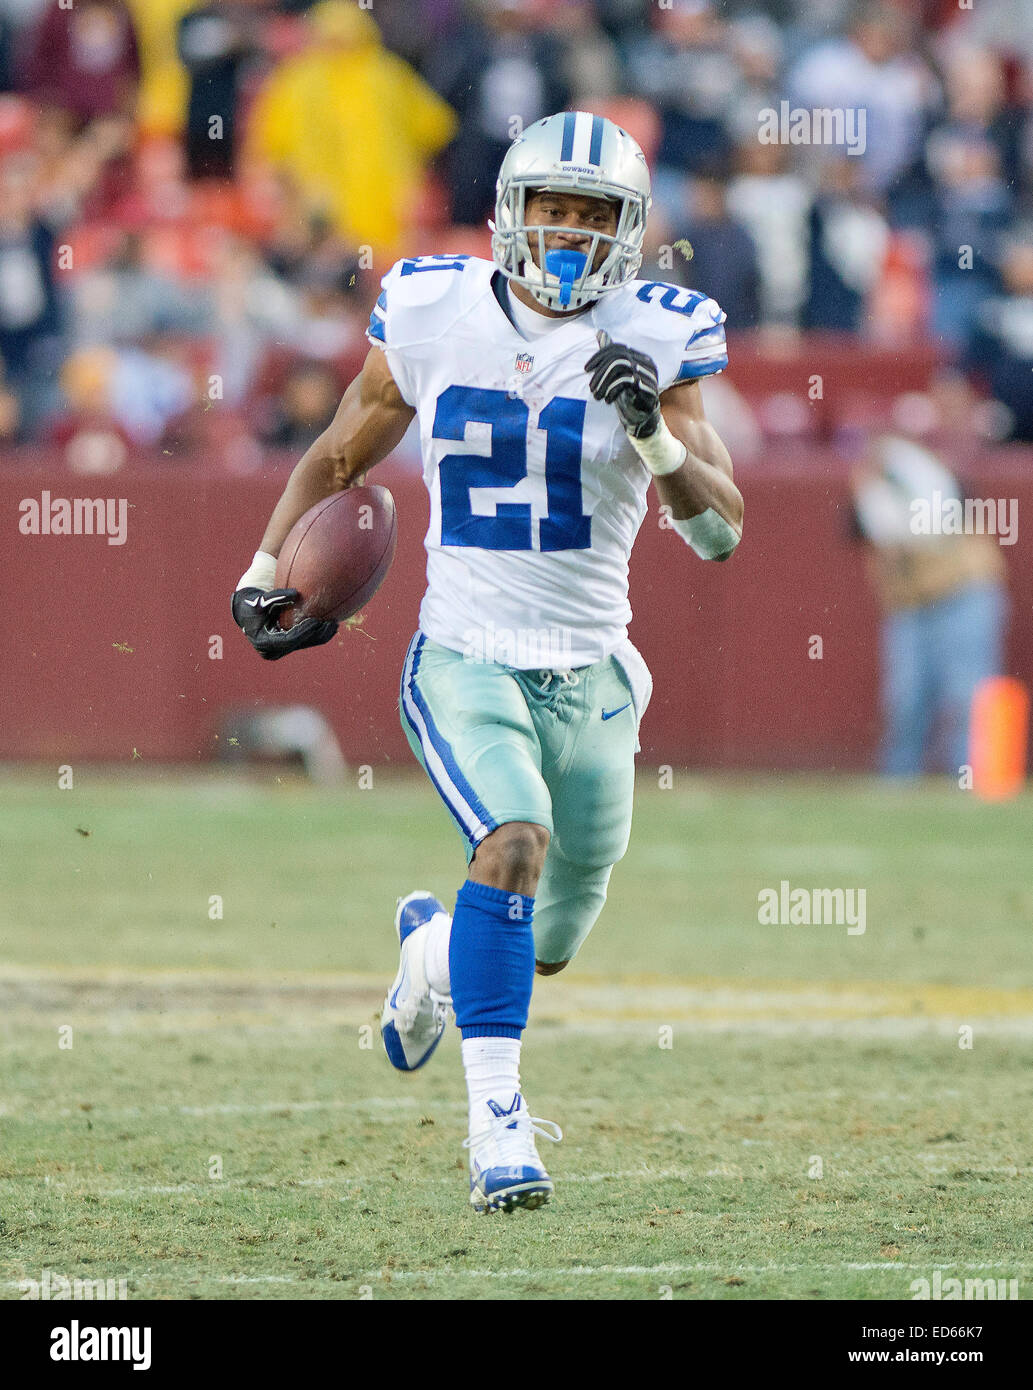 Dallas Cowboys running back Joseph Randle scores a touchdown on a long run in the fourth quarter against the Washington Redskins at FedEx Field in Landover, Maryland on Sunday, December 28, 2014. The Cowboys won the game 44-17. Credit: Ron Sachs/CNP Stock Photo